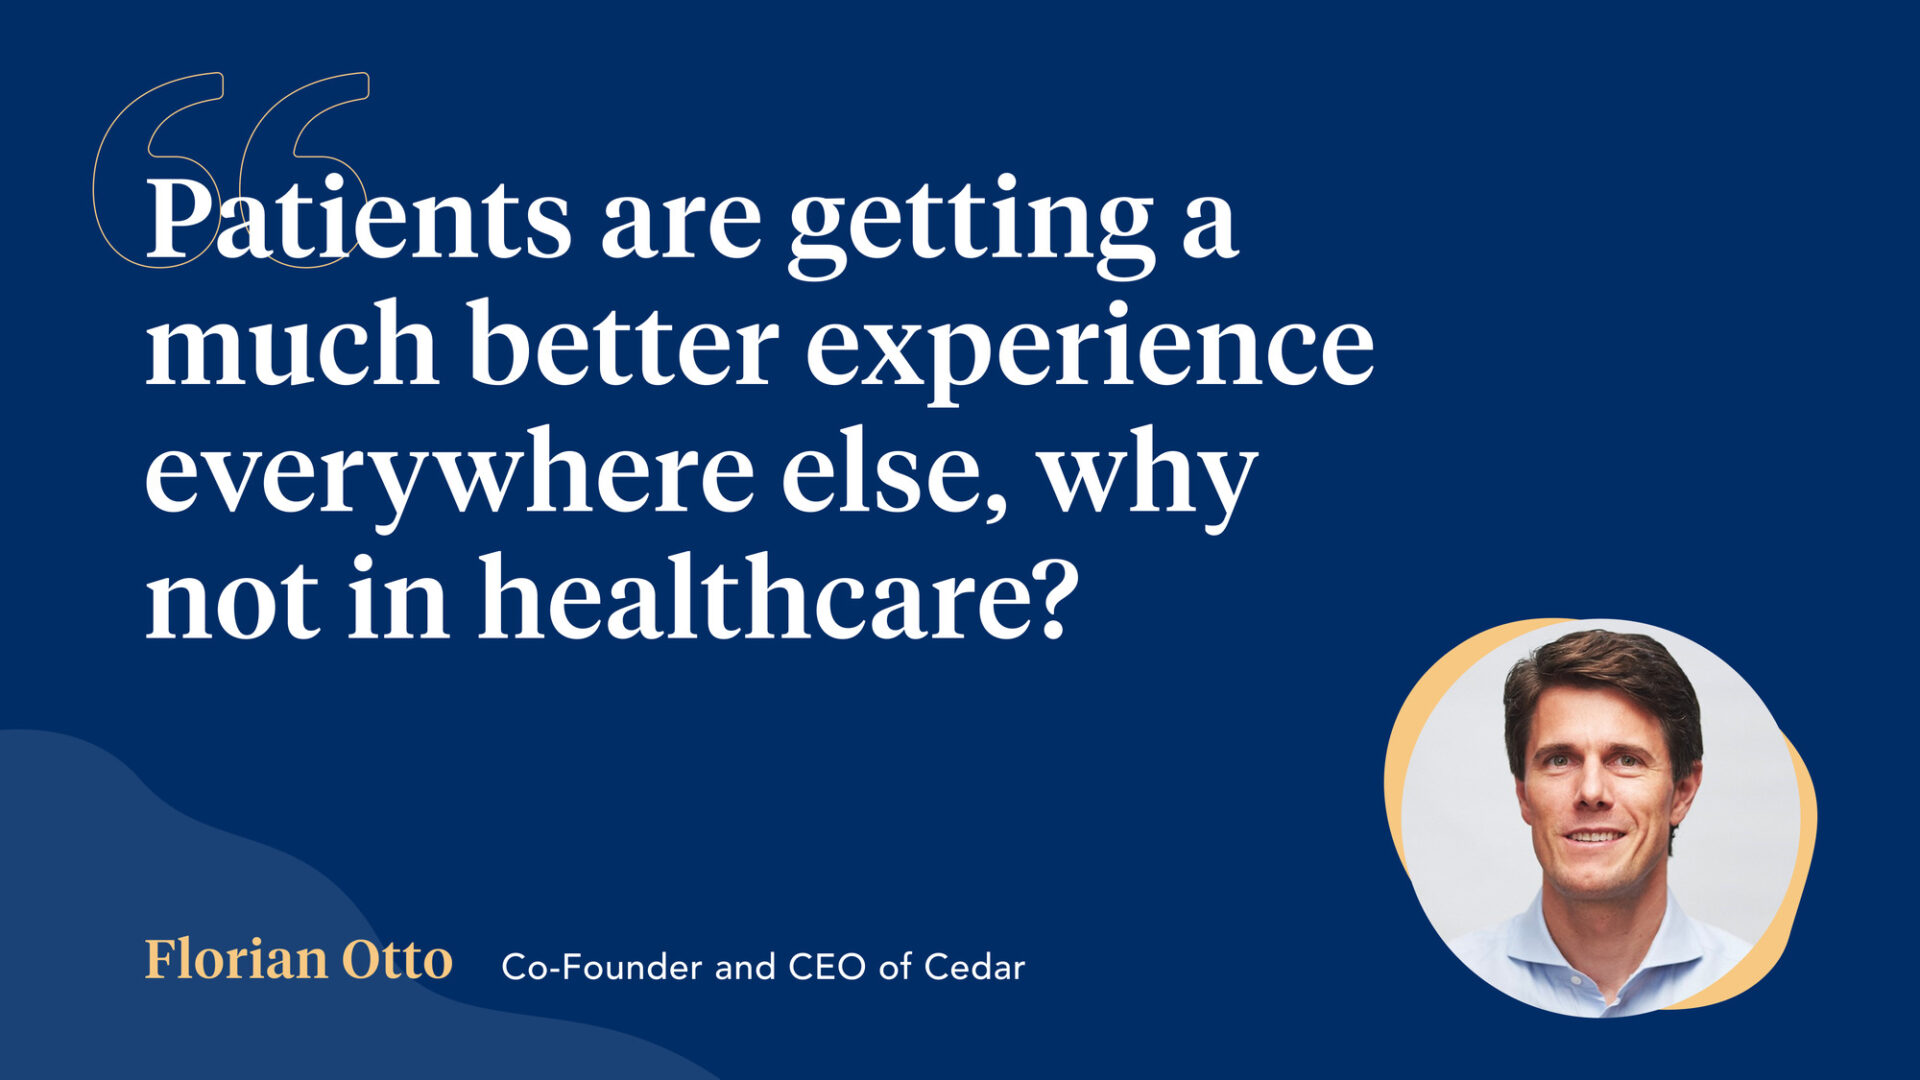 Axios Features Cedar in Health Care  Payments Special: “Patients are getting a much better experience  everywhere else, why not in healthcare?”